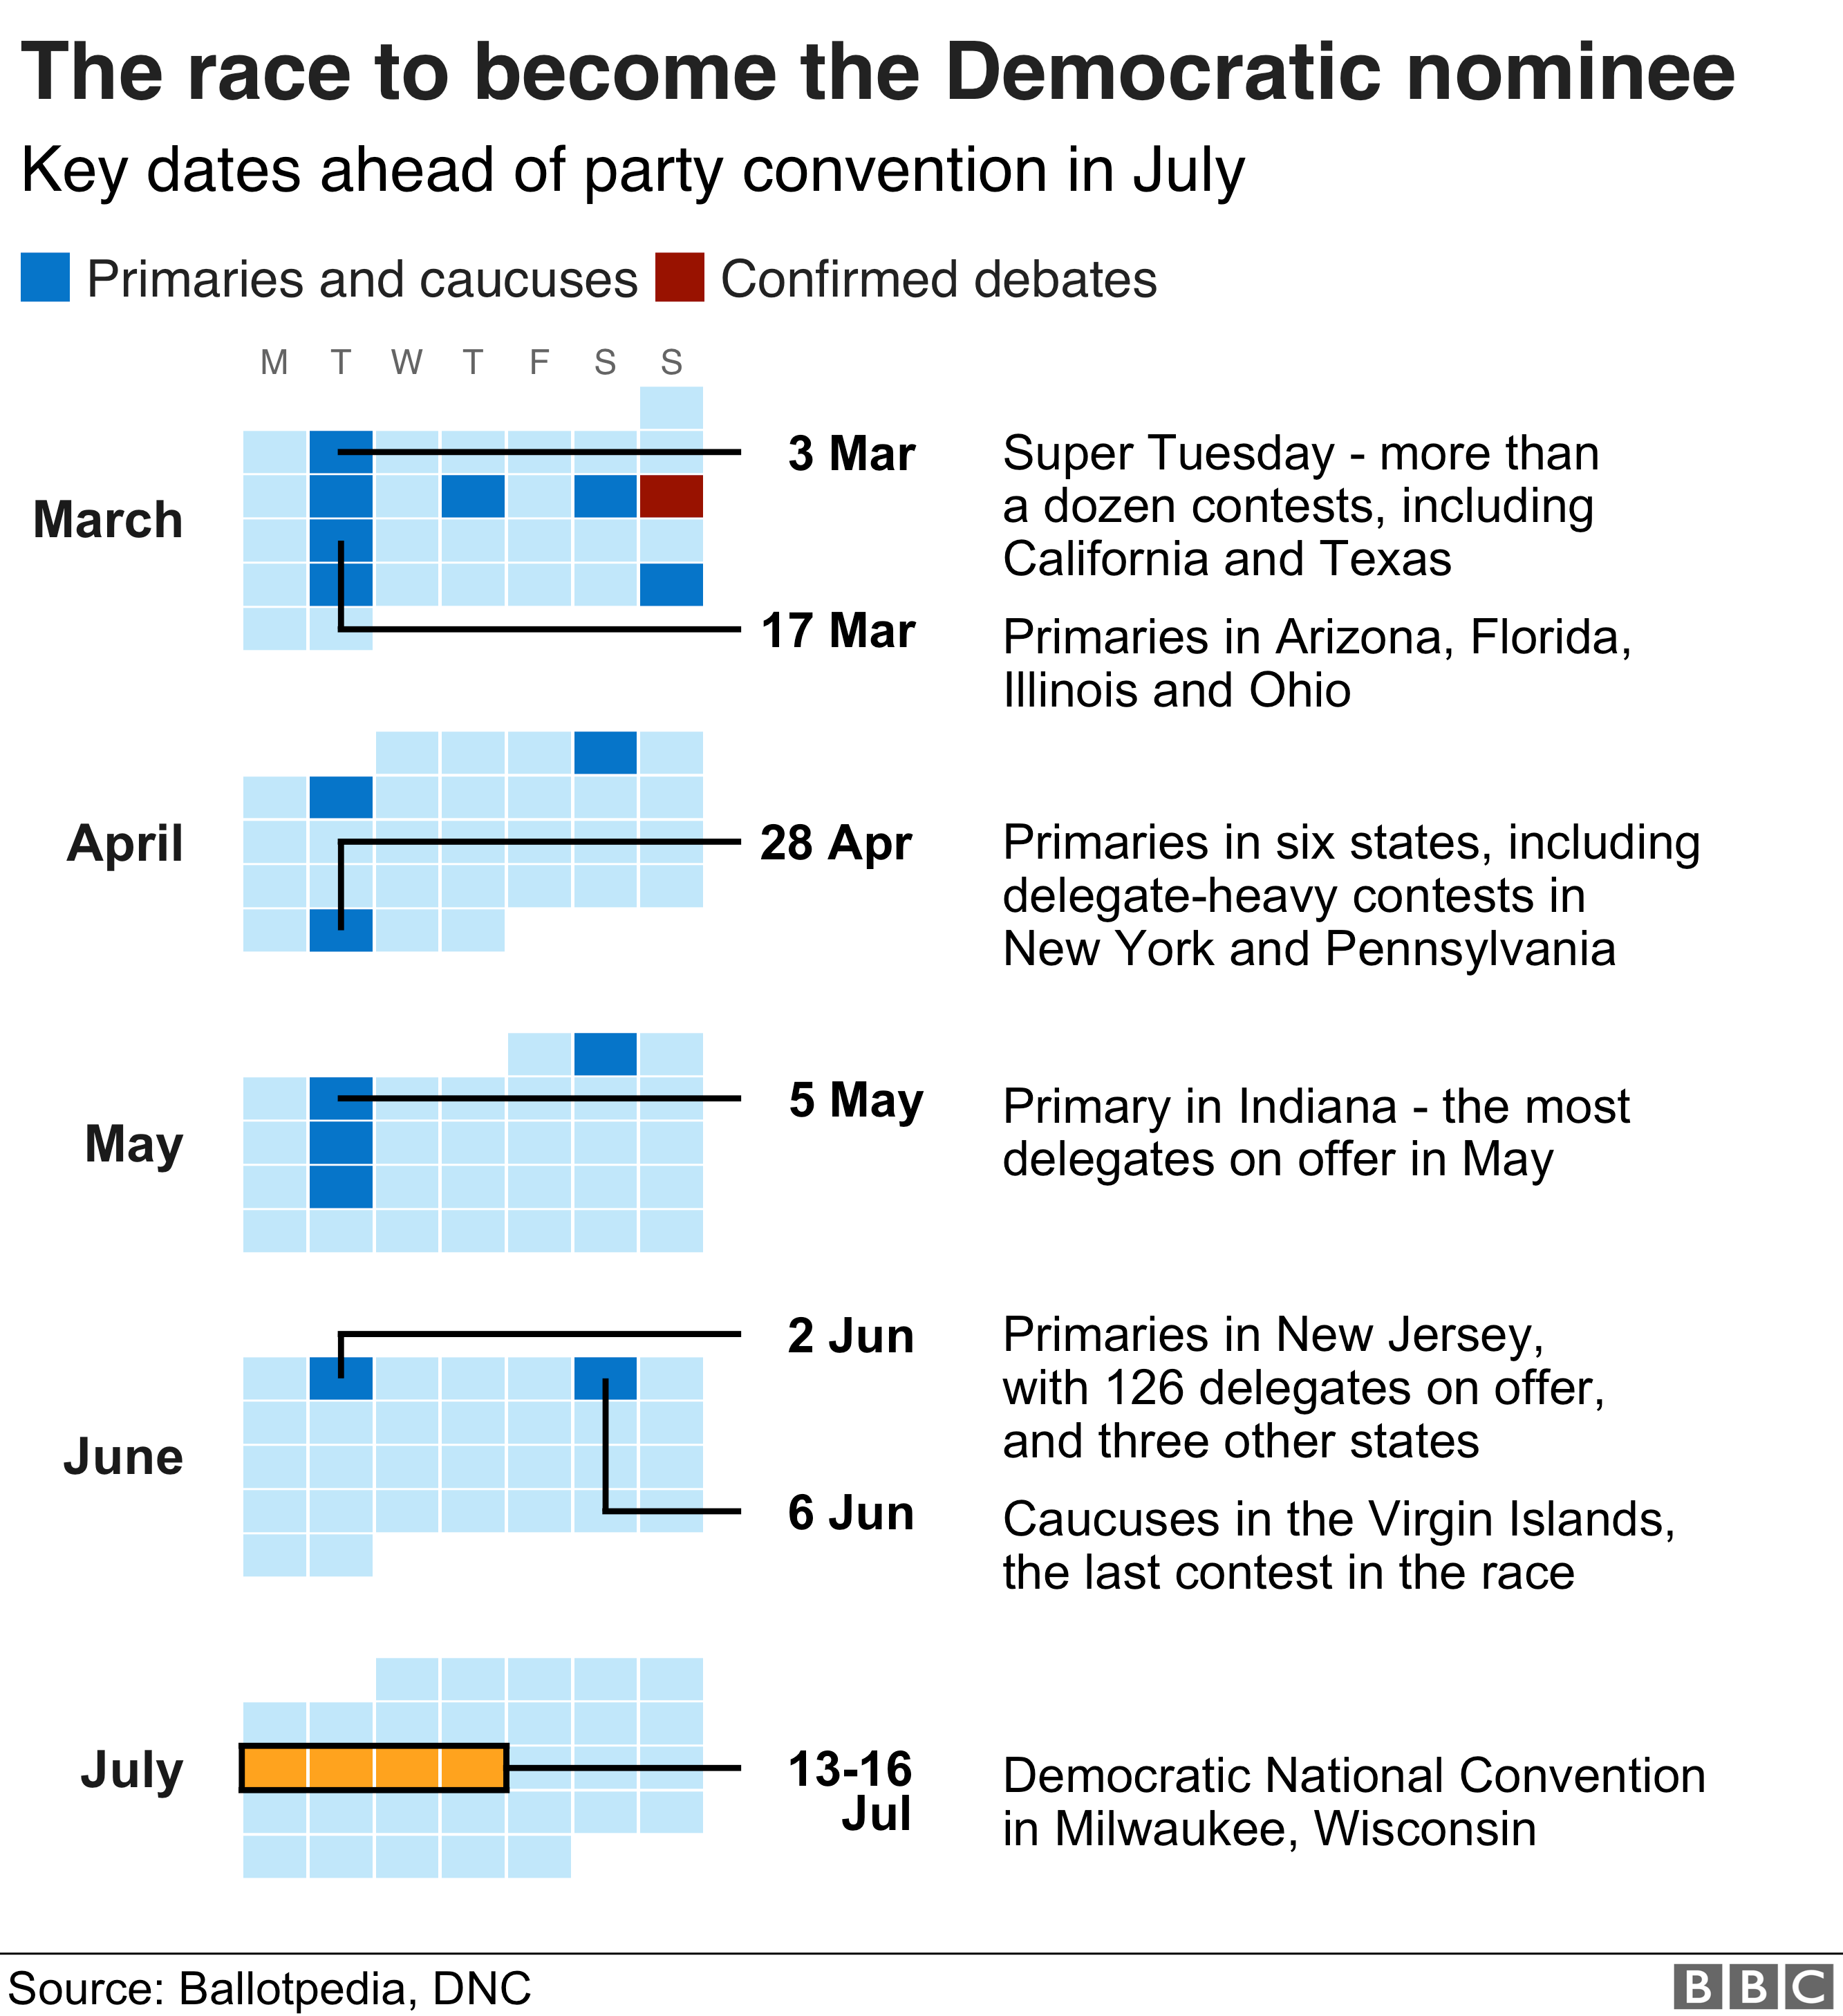 Calendar showing key dates in the race to become the Democratic nominee